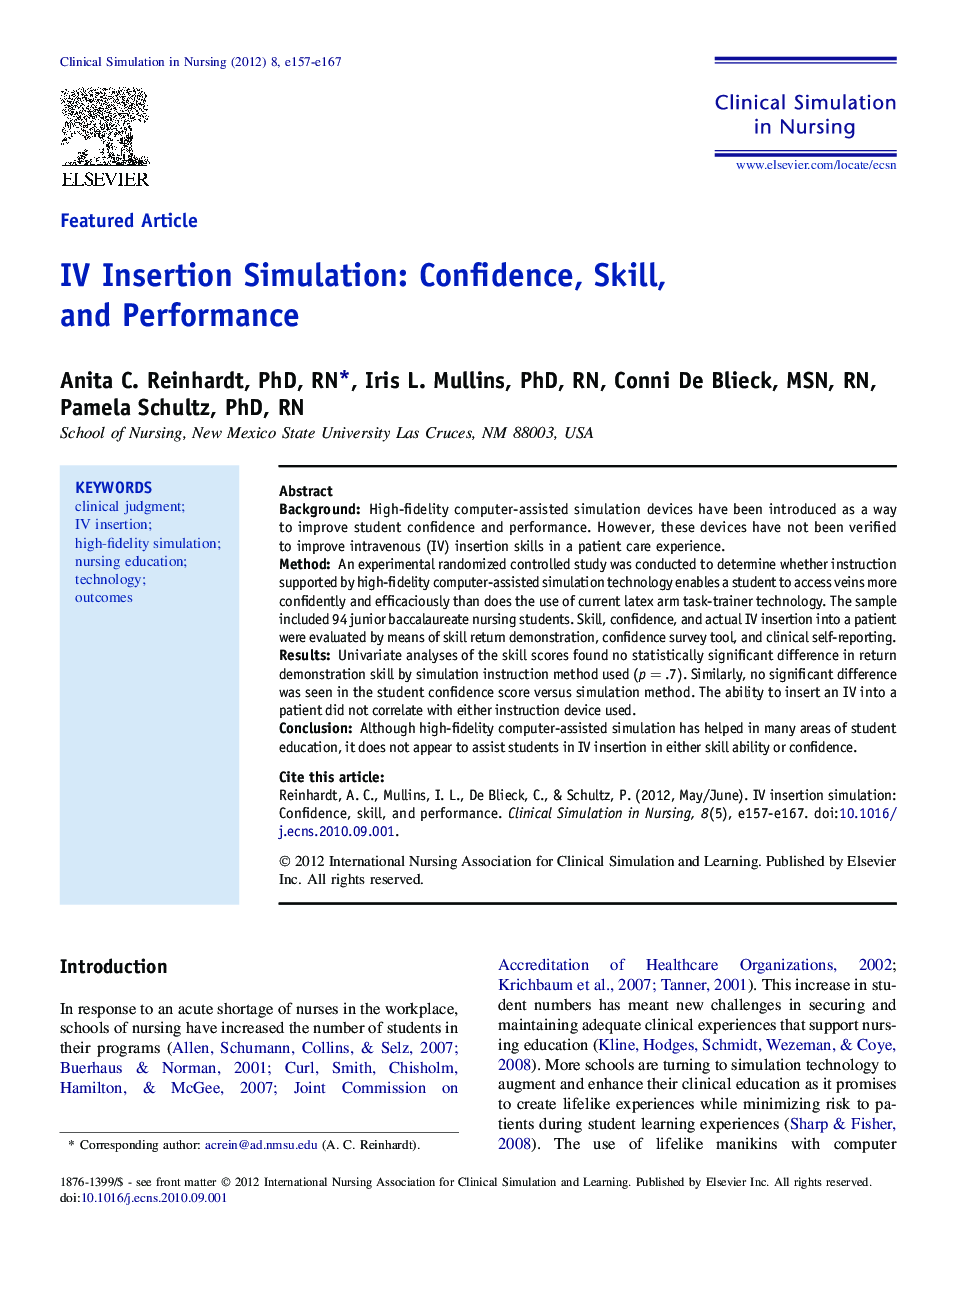 IV Insertion Simulation: Confidence, Skill, and Performance